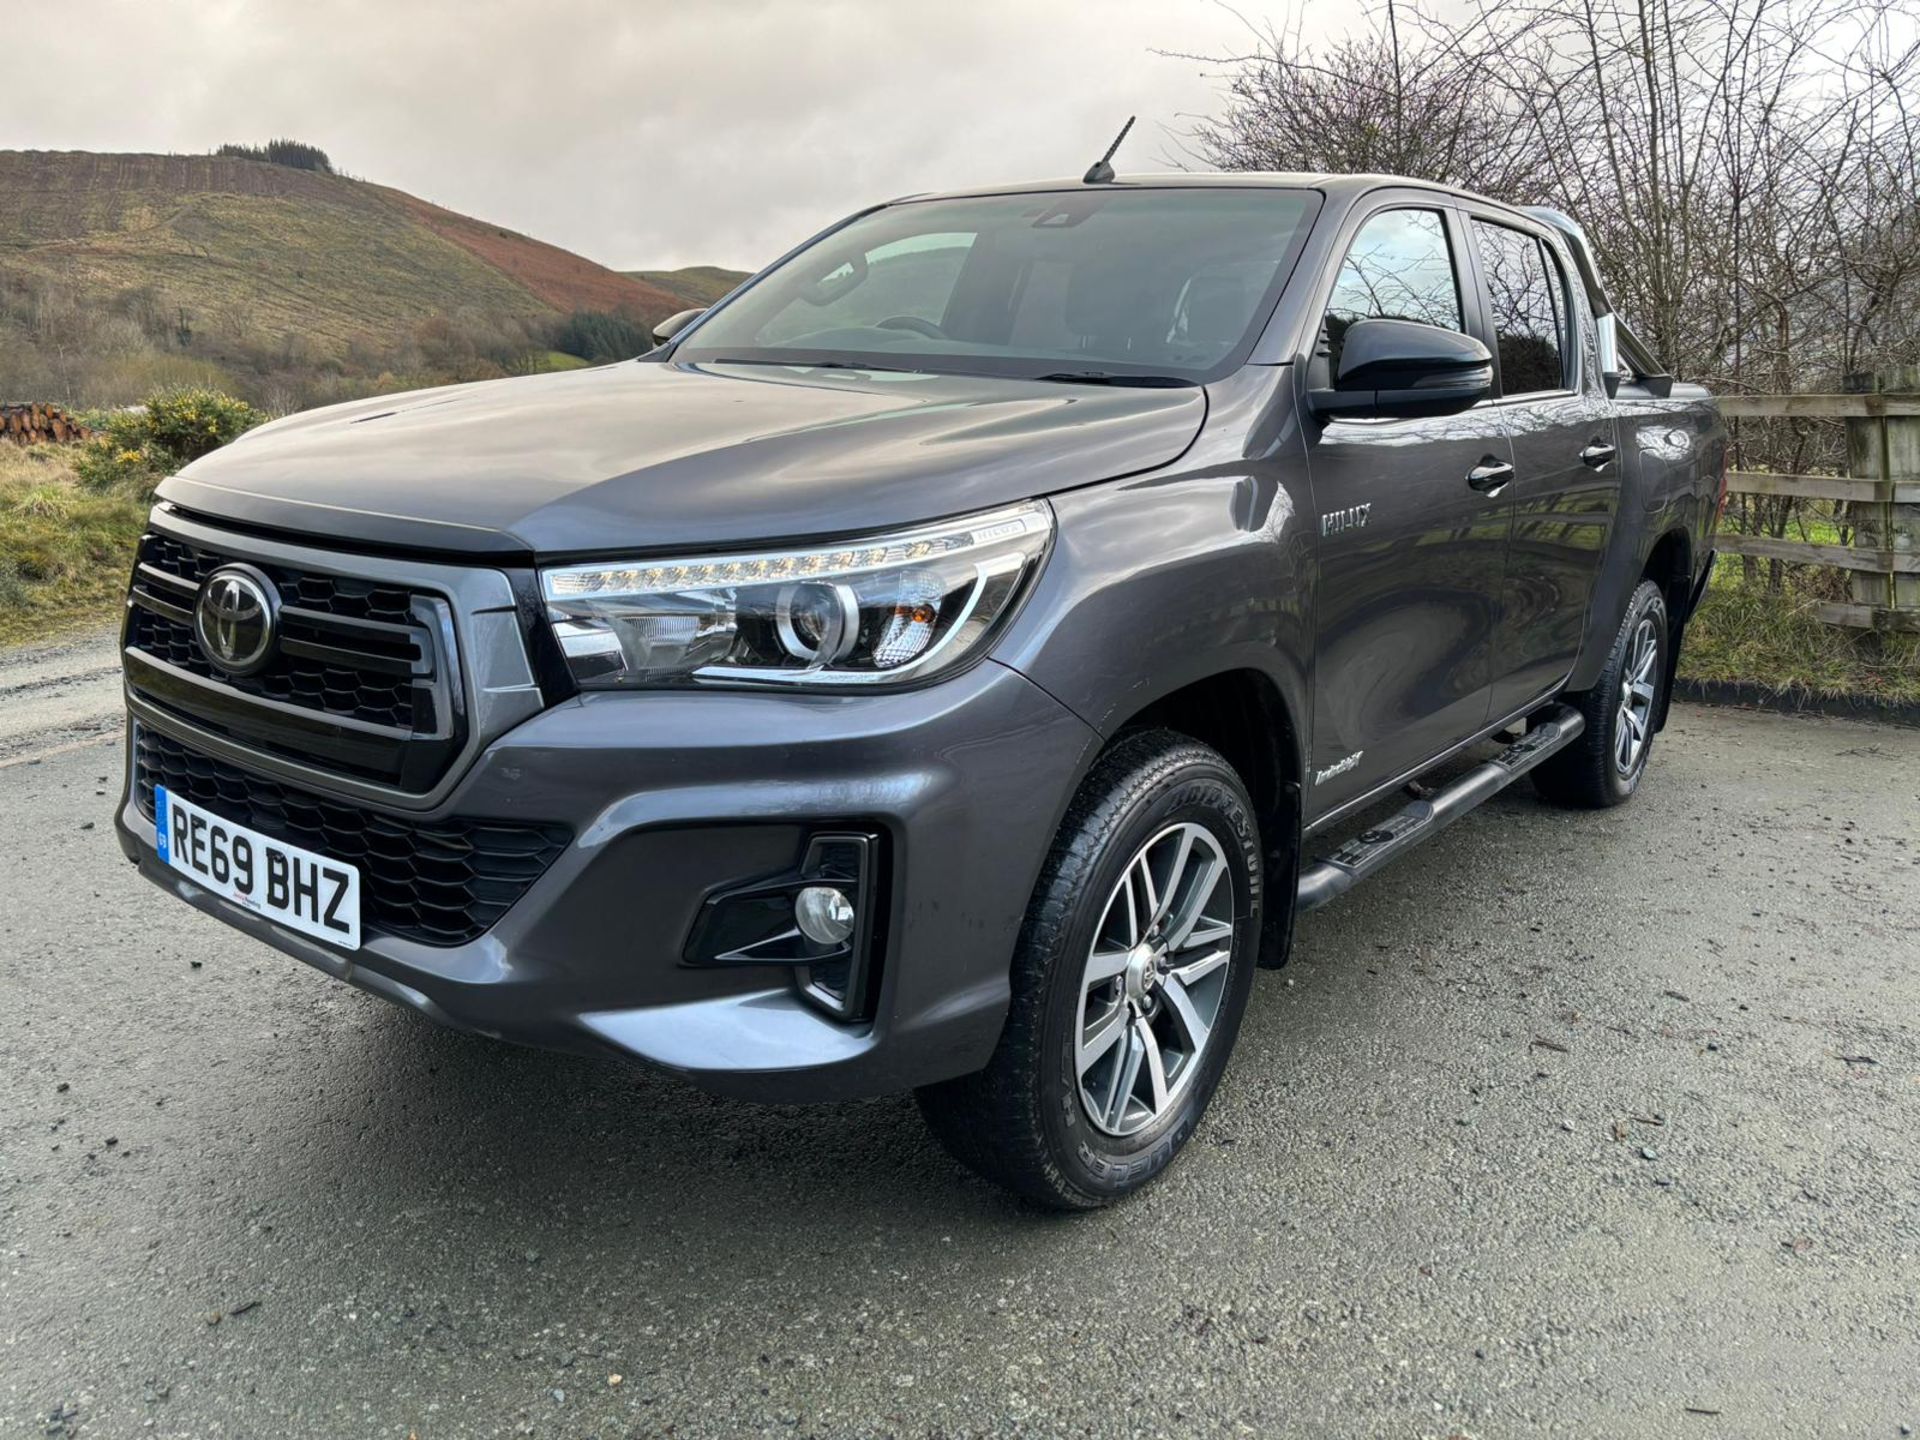 TOYOTA HILUX INVINCIBLE X DOUBLE CAB PICKUP TRUCK 4X4 AUTOMATIC 64K 4WD TWIN CAB - Image 2 of 13